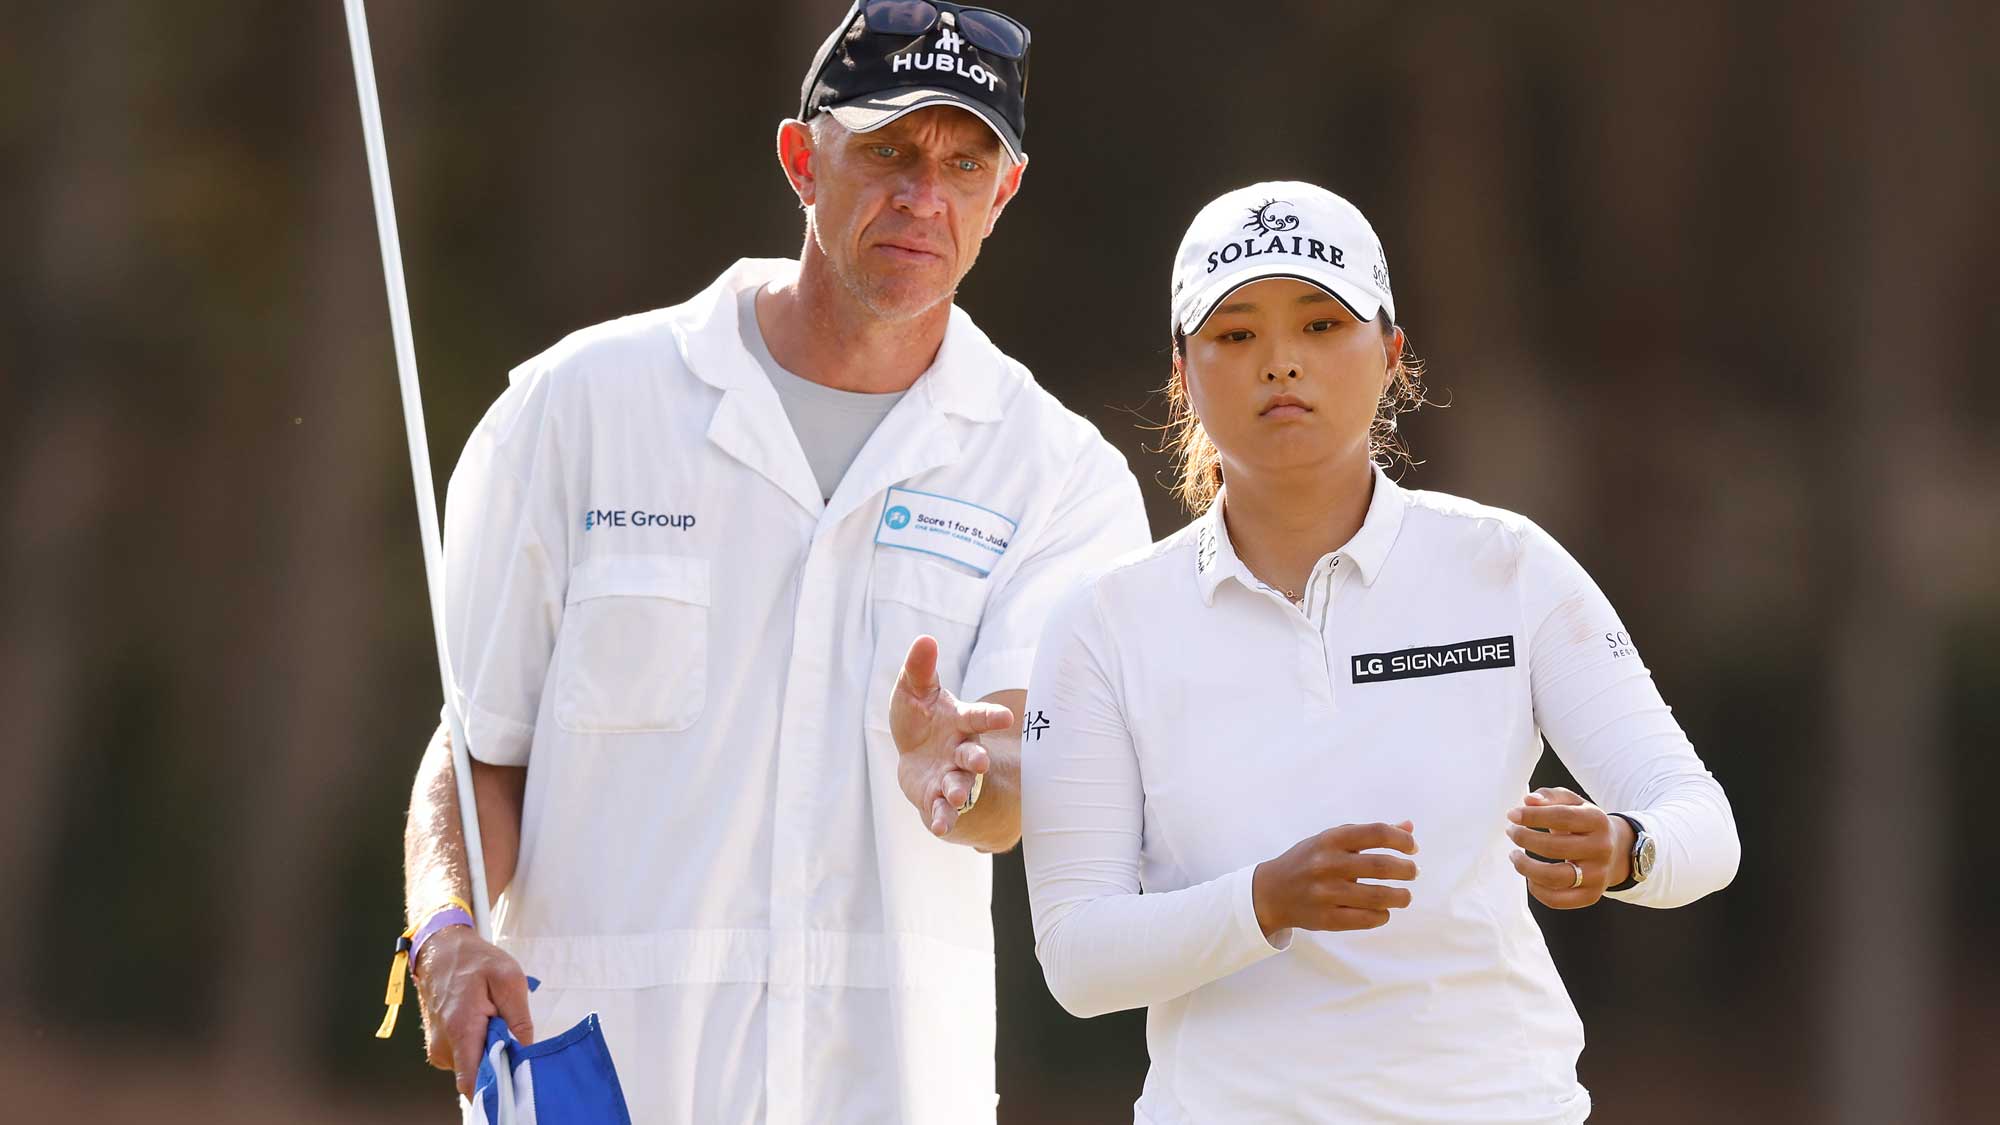 Jin Young Ko of Korea talks with her caddie, David Brooker, on the third hole during the final round of the CME Group Tour Championship